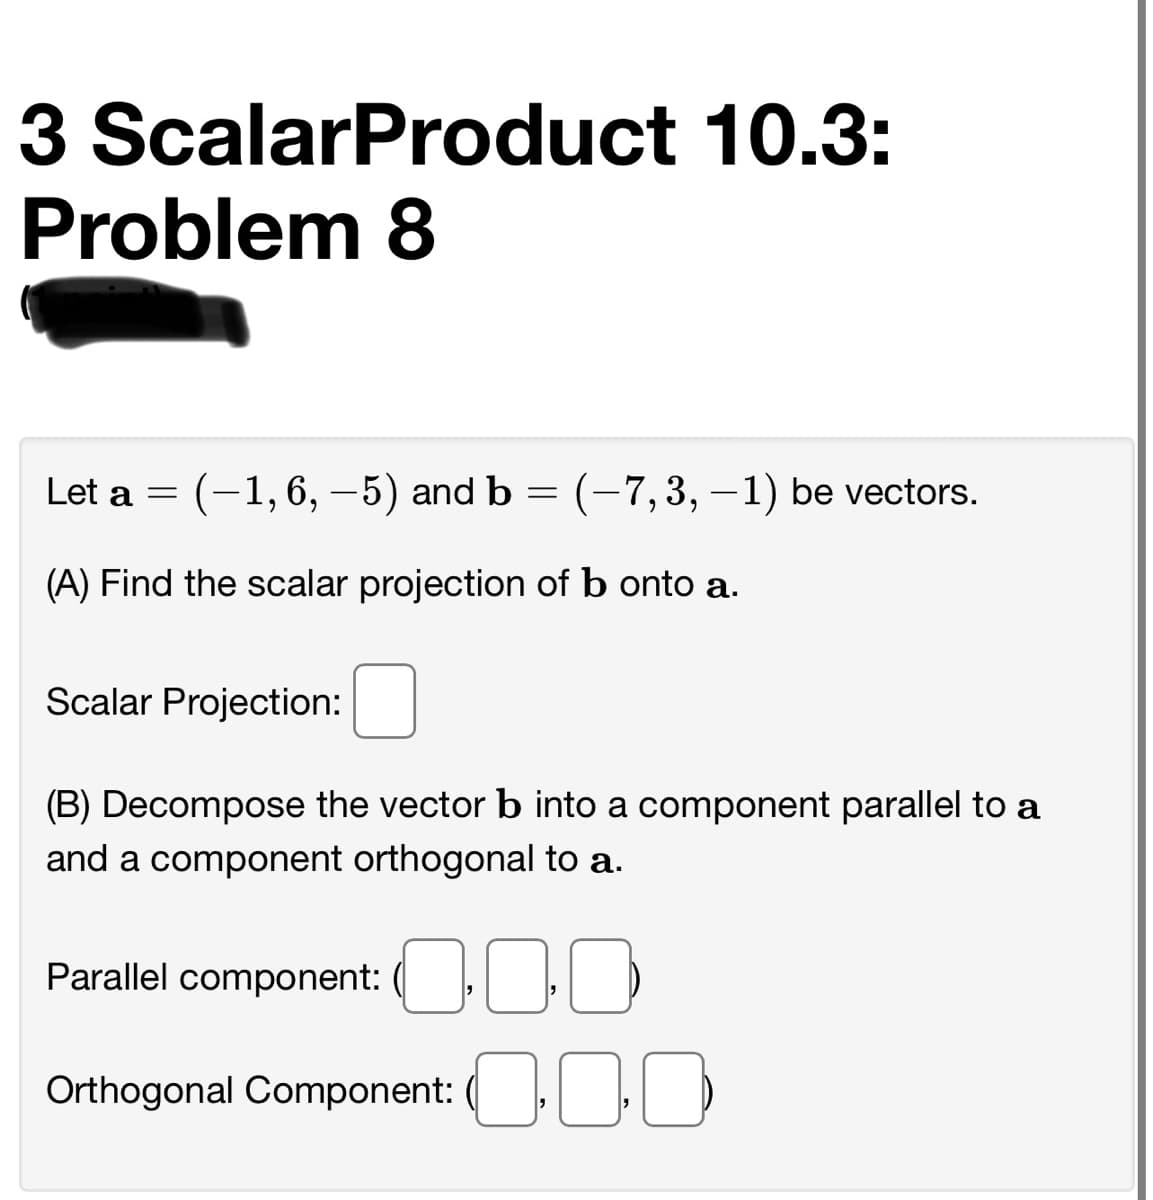 3 ScalarProduct 10.3:
Problem 8
Let a = (-1,6, –5) and b = (-7,3, –1) be vectors.
(A) Find the scalar projection of b onto a.
Scalar Projection:
(B) Decompose the vector b into a component parallel to a
and a component orthogonal to a.
Parallel component: ( |}
Orthogonal Component: ( |)
